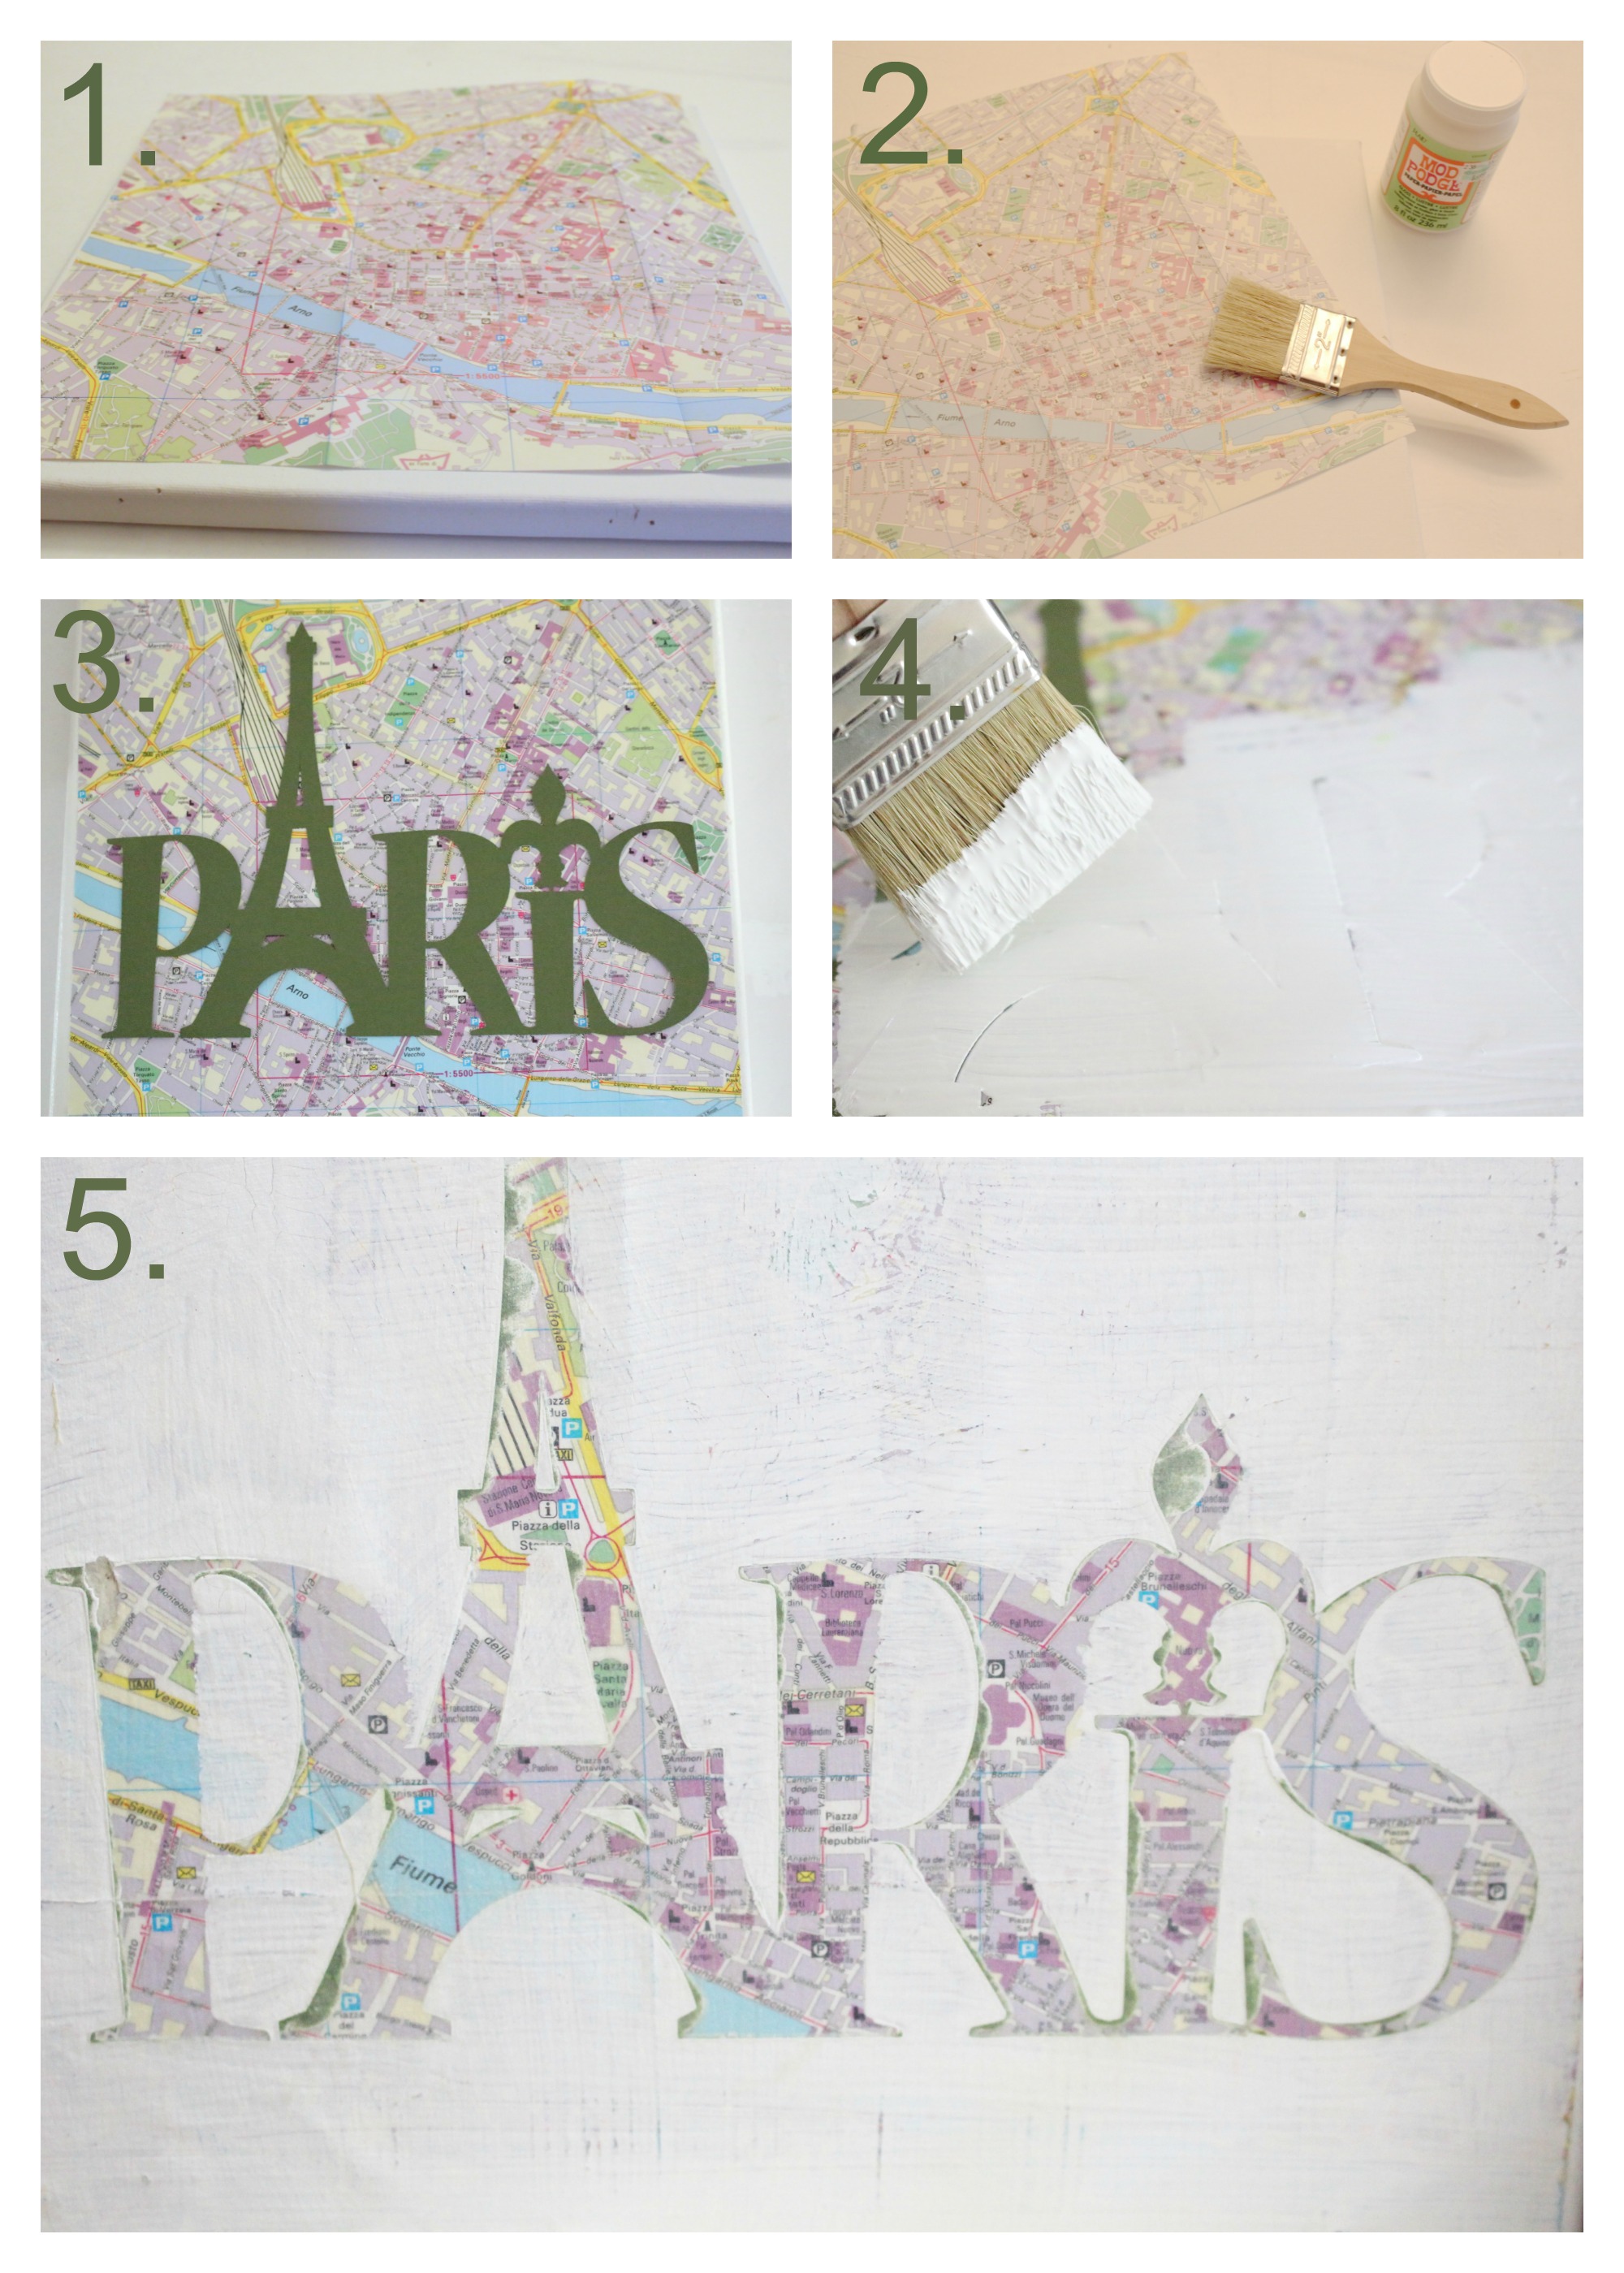 create-with-me-canvas-paris-project-step-by-step-instructions-to-making-a-map-canvas-mod-podge-project-painted-canvas-paris-art-project